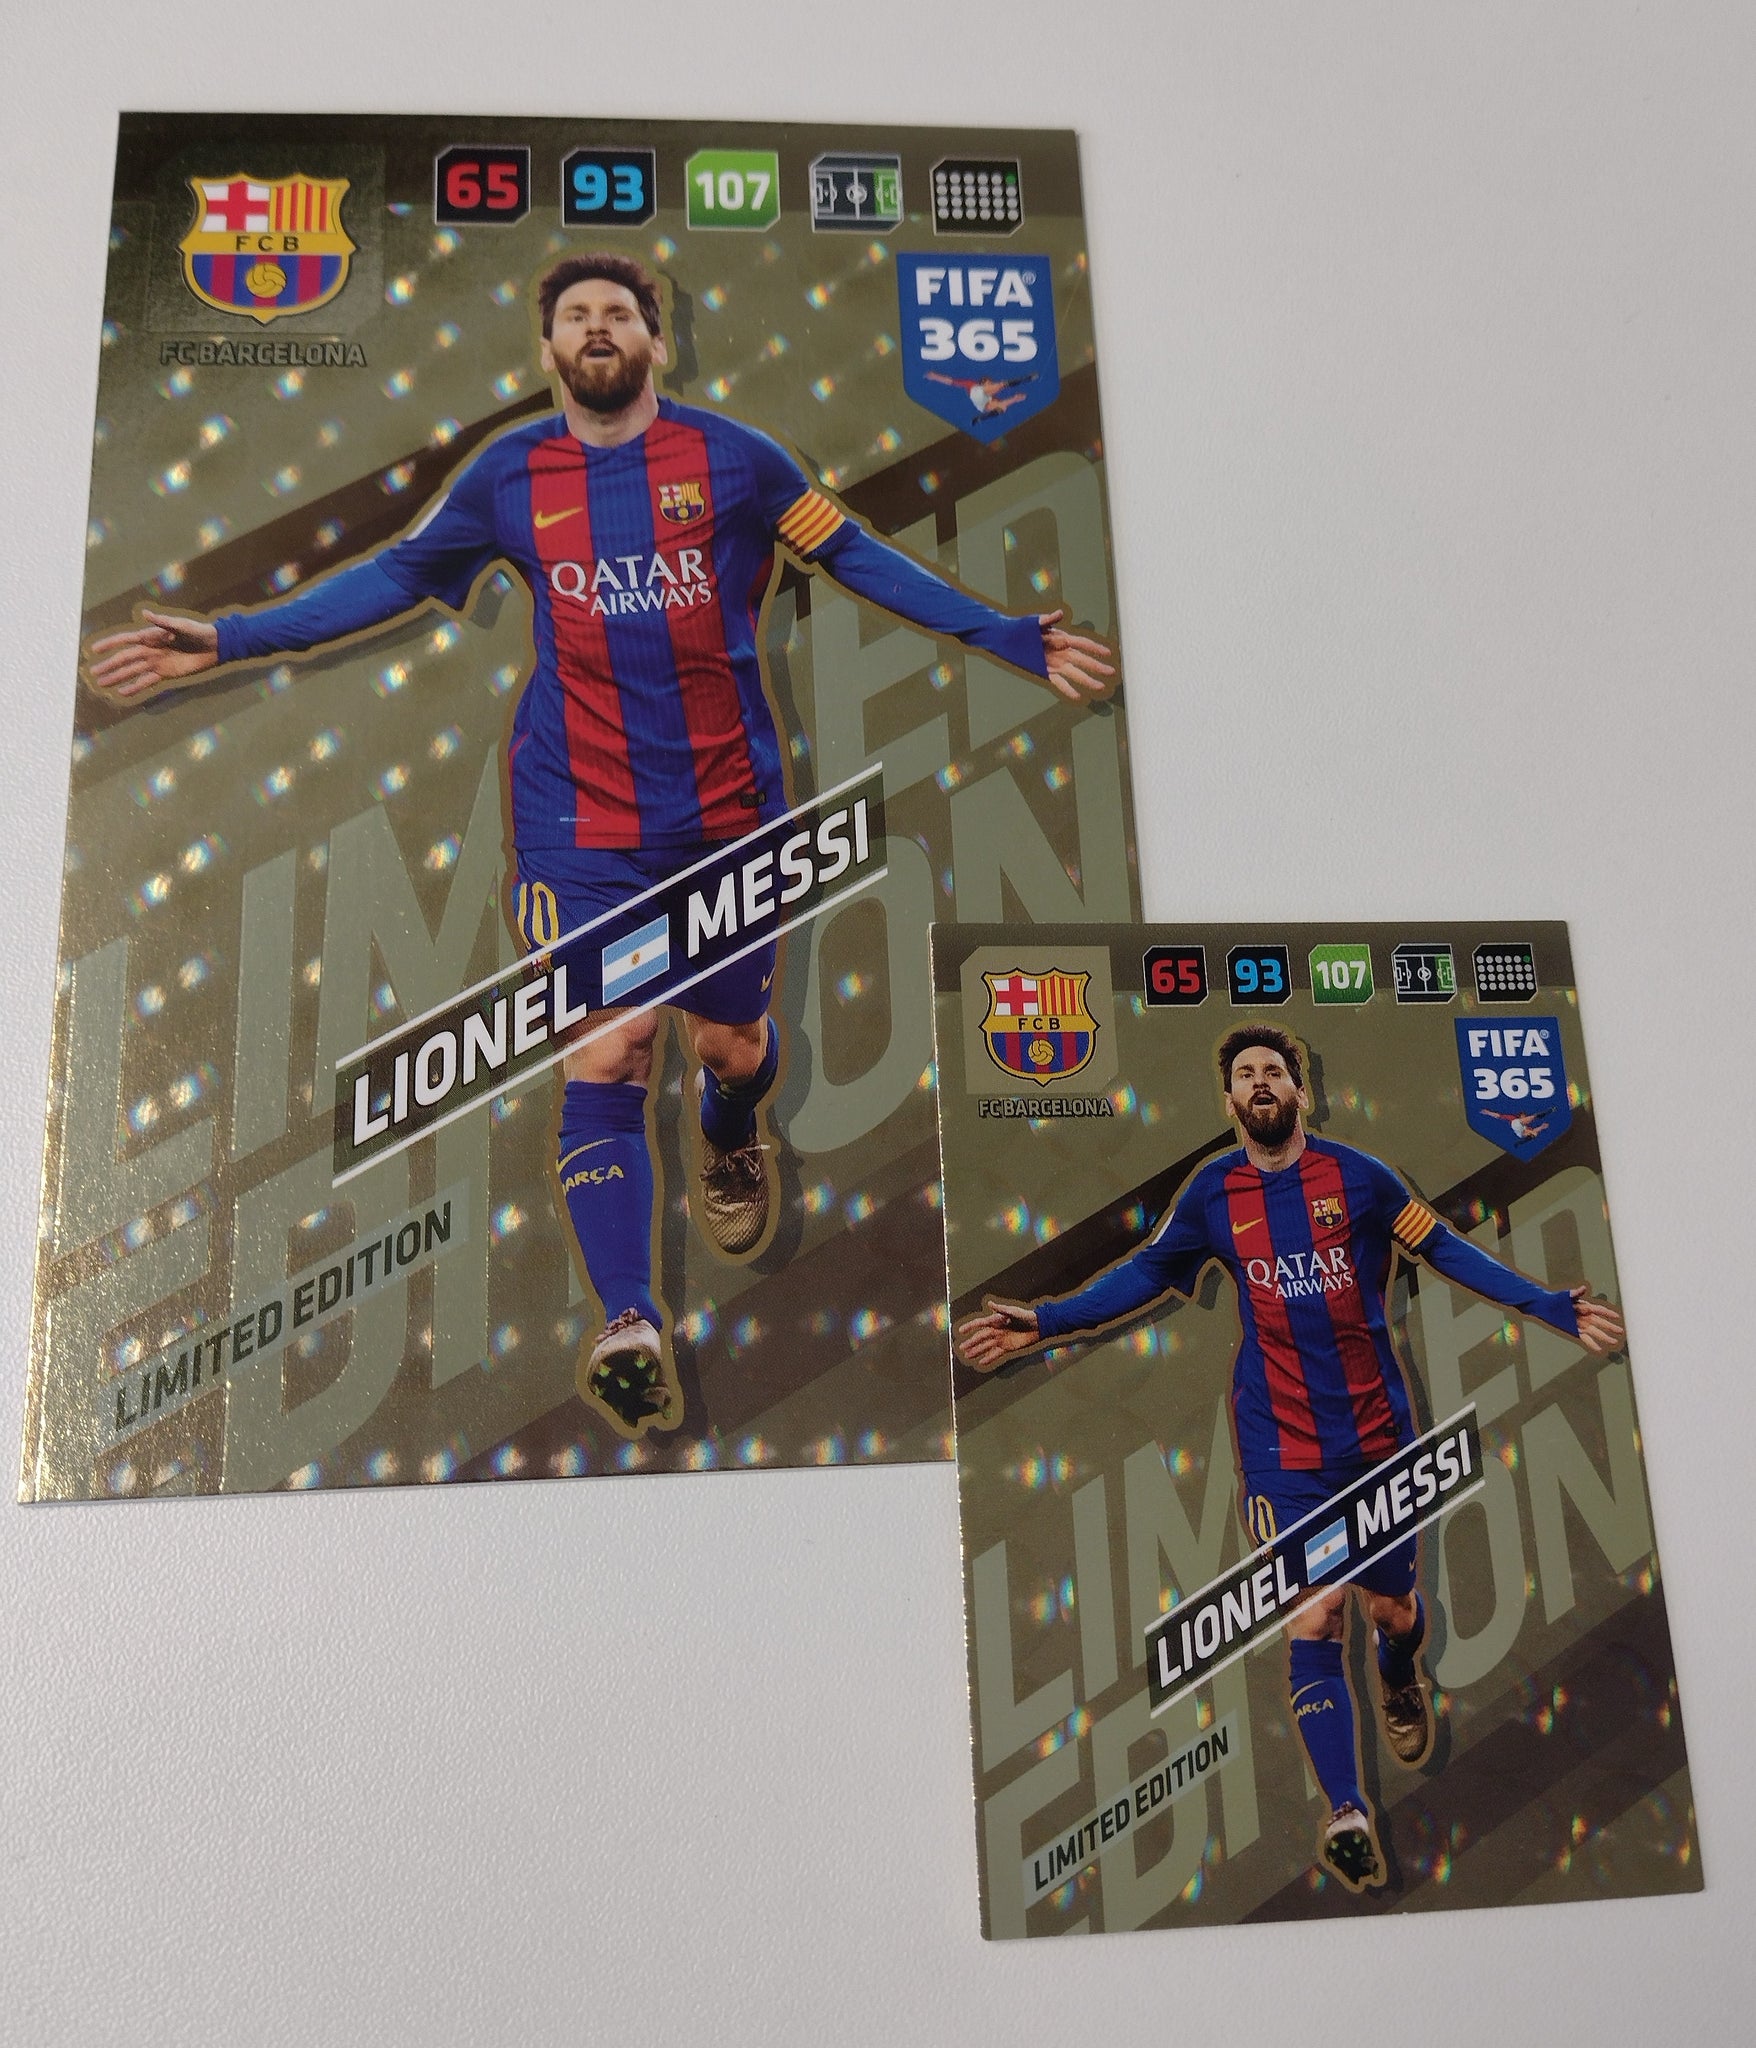 2017-18 Panini Adrenalyn FIFA 365 Lionel Messi Limited Edition Trading Card Set (XL+XXL)